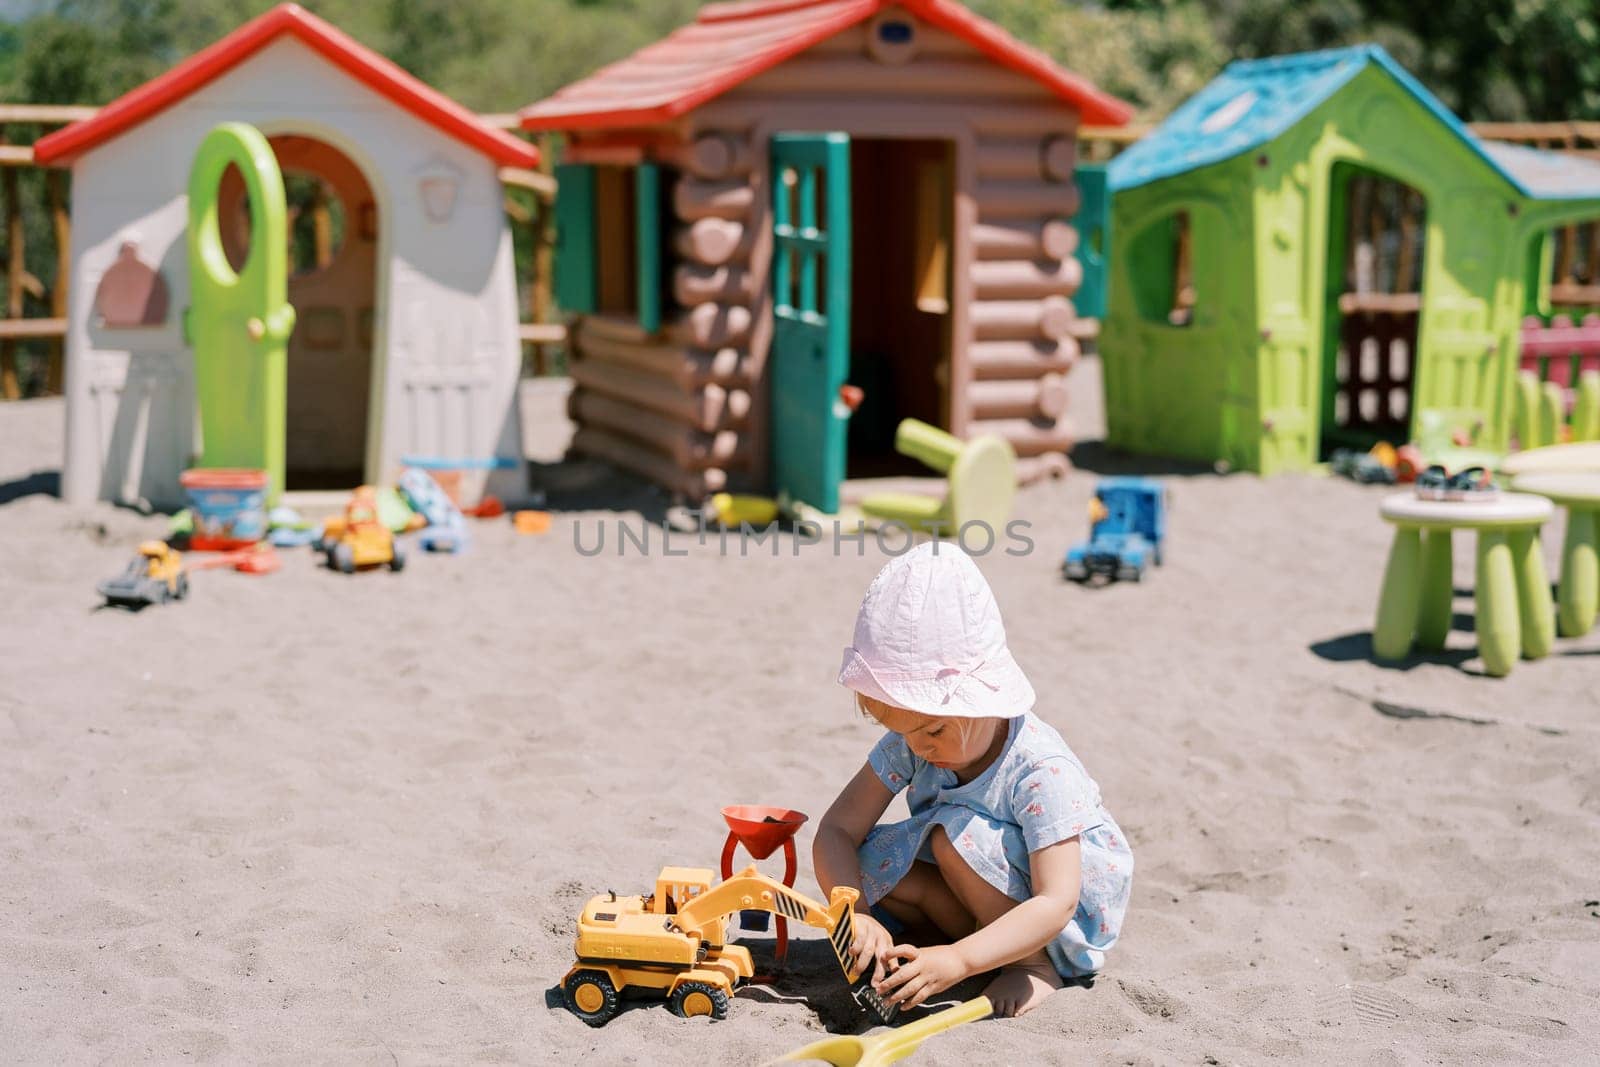 Little girl digs sand with a toy excavator while squatting by Nadtochiy